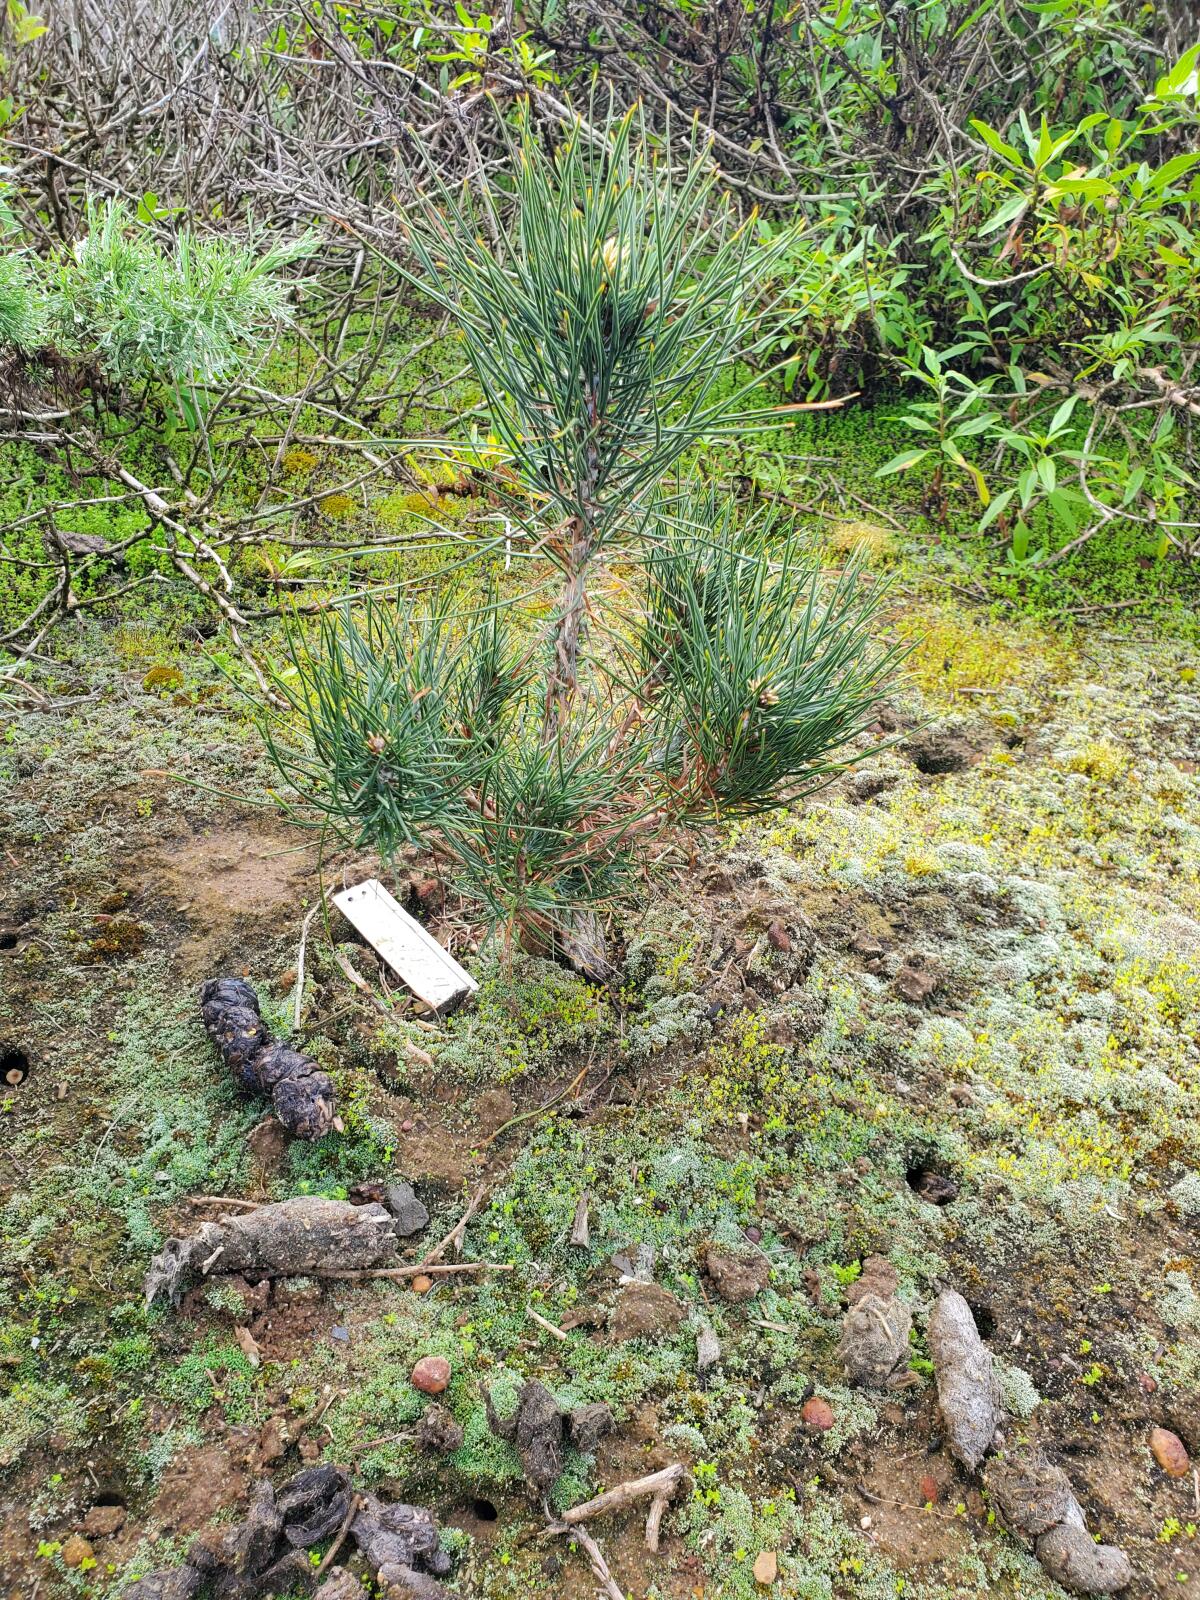 A young Torrey pine tree grows in the Scripps Coastal Reserve.